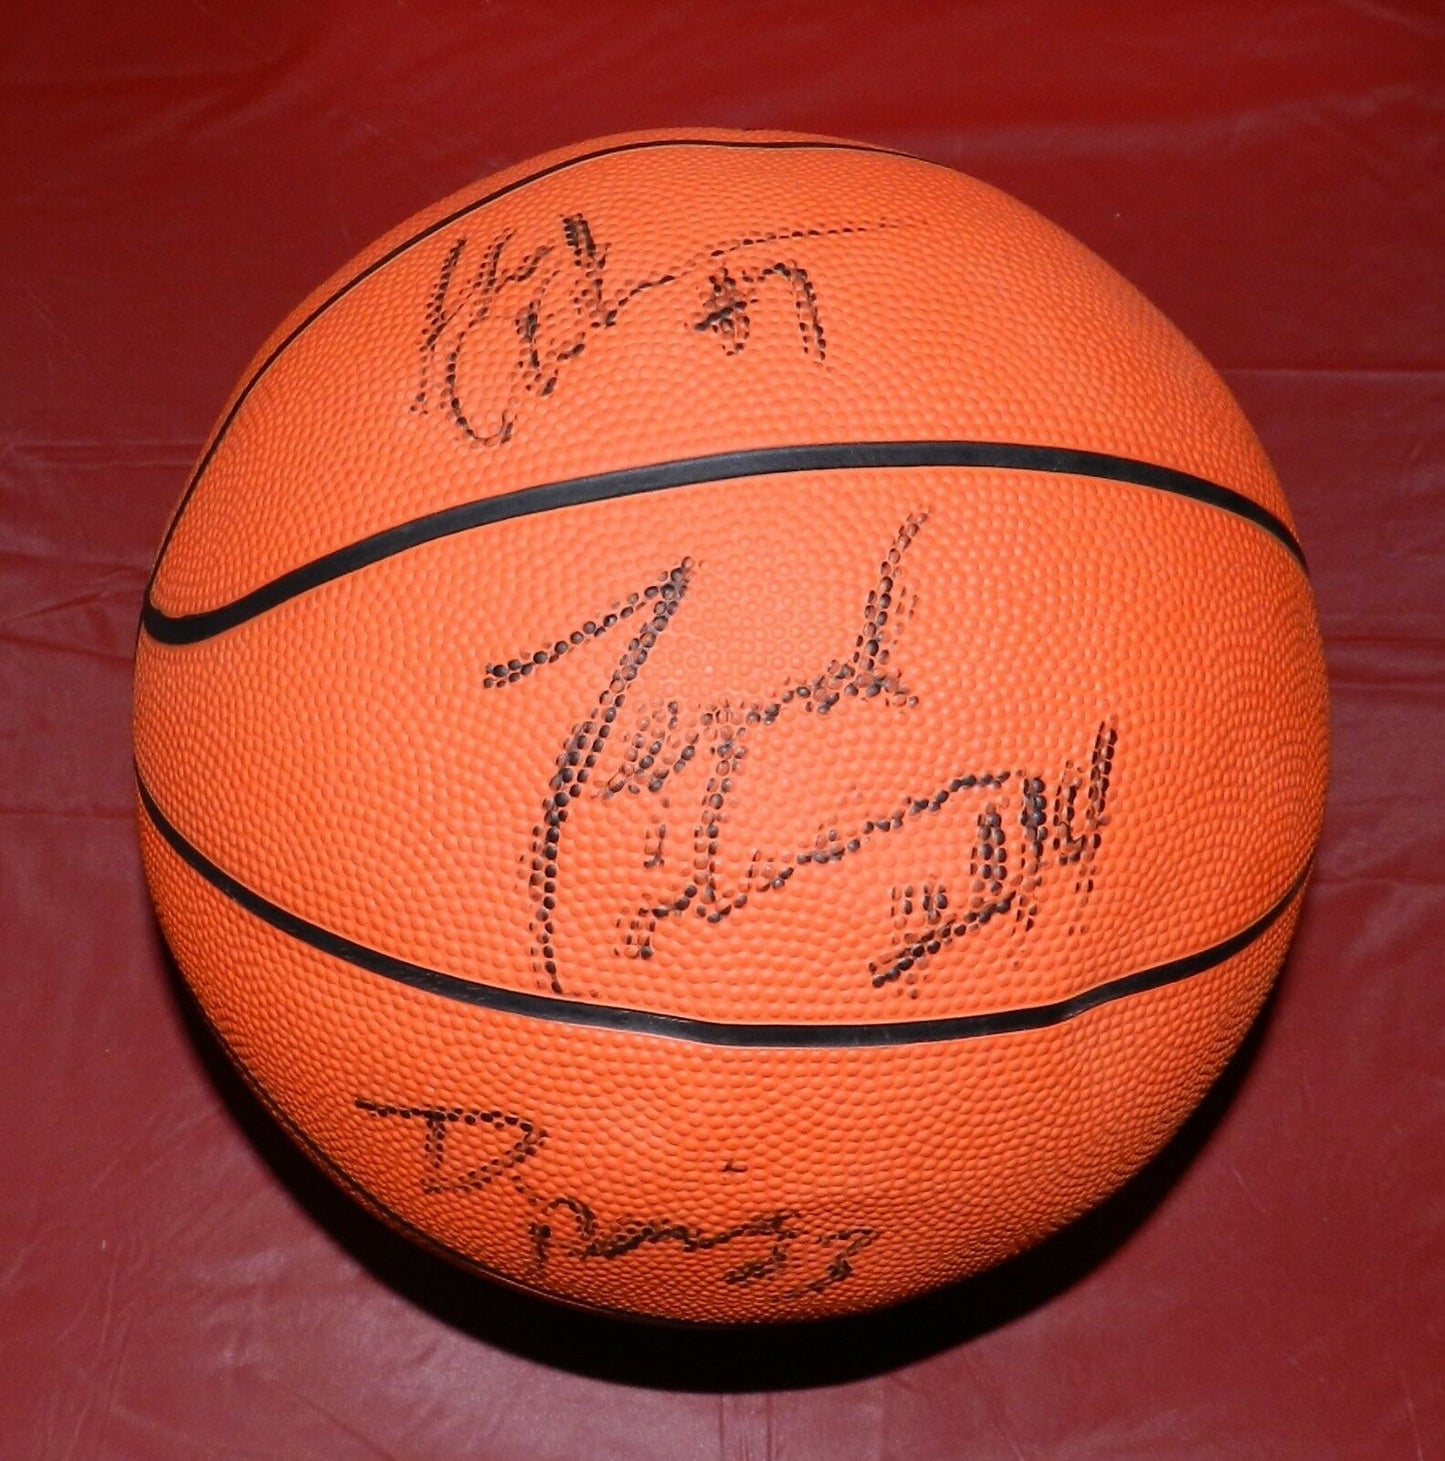 Drazen Petrovic Autographed Basketball with JSA COA Derrick Coleman and more